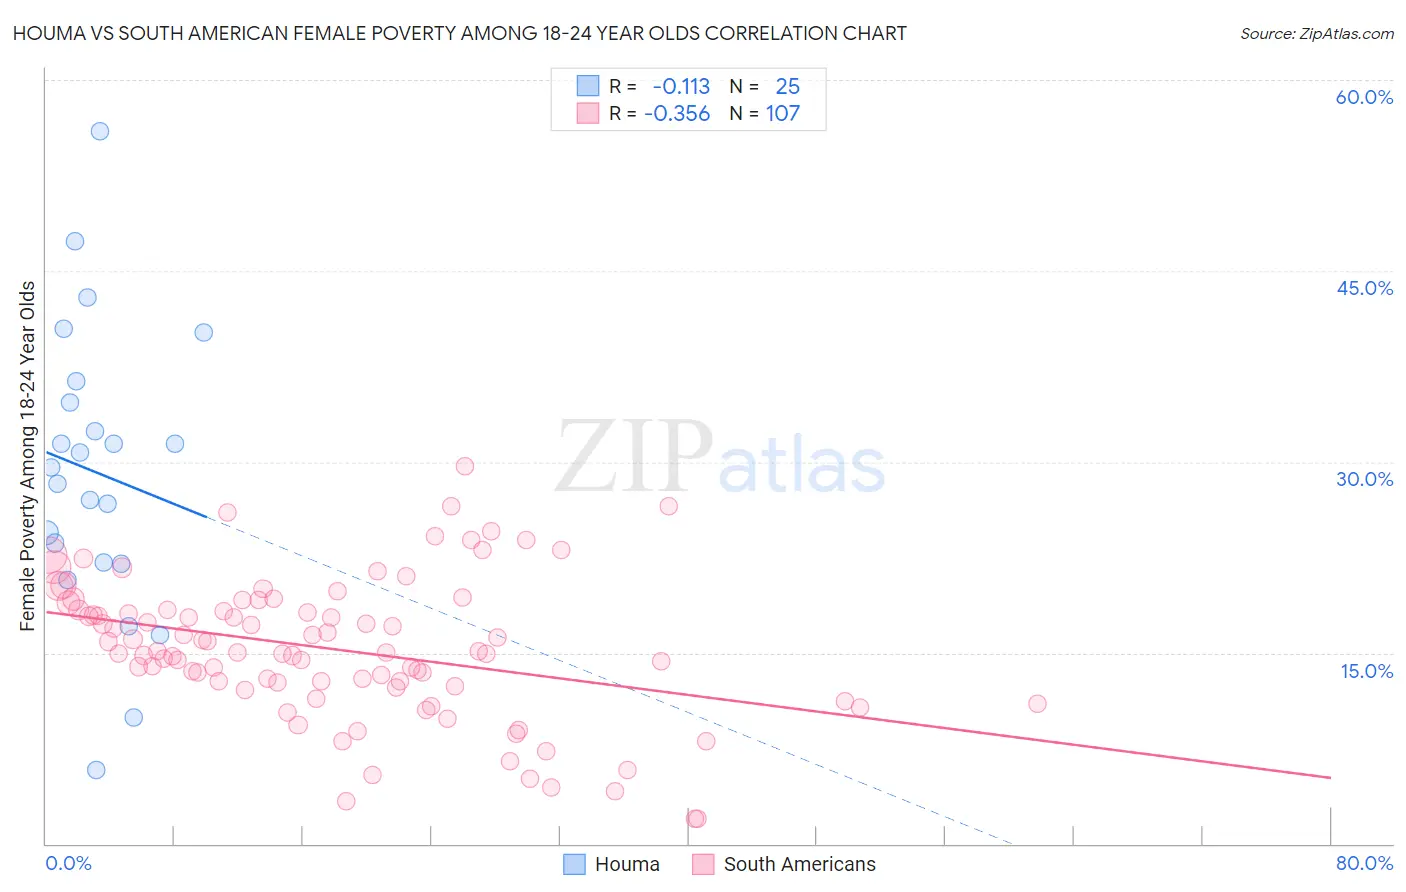 Houma vs South American Female Poverty Among 18-24 Year Olds